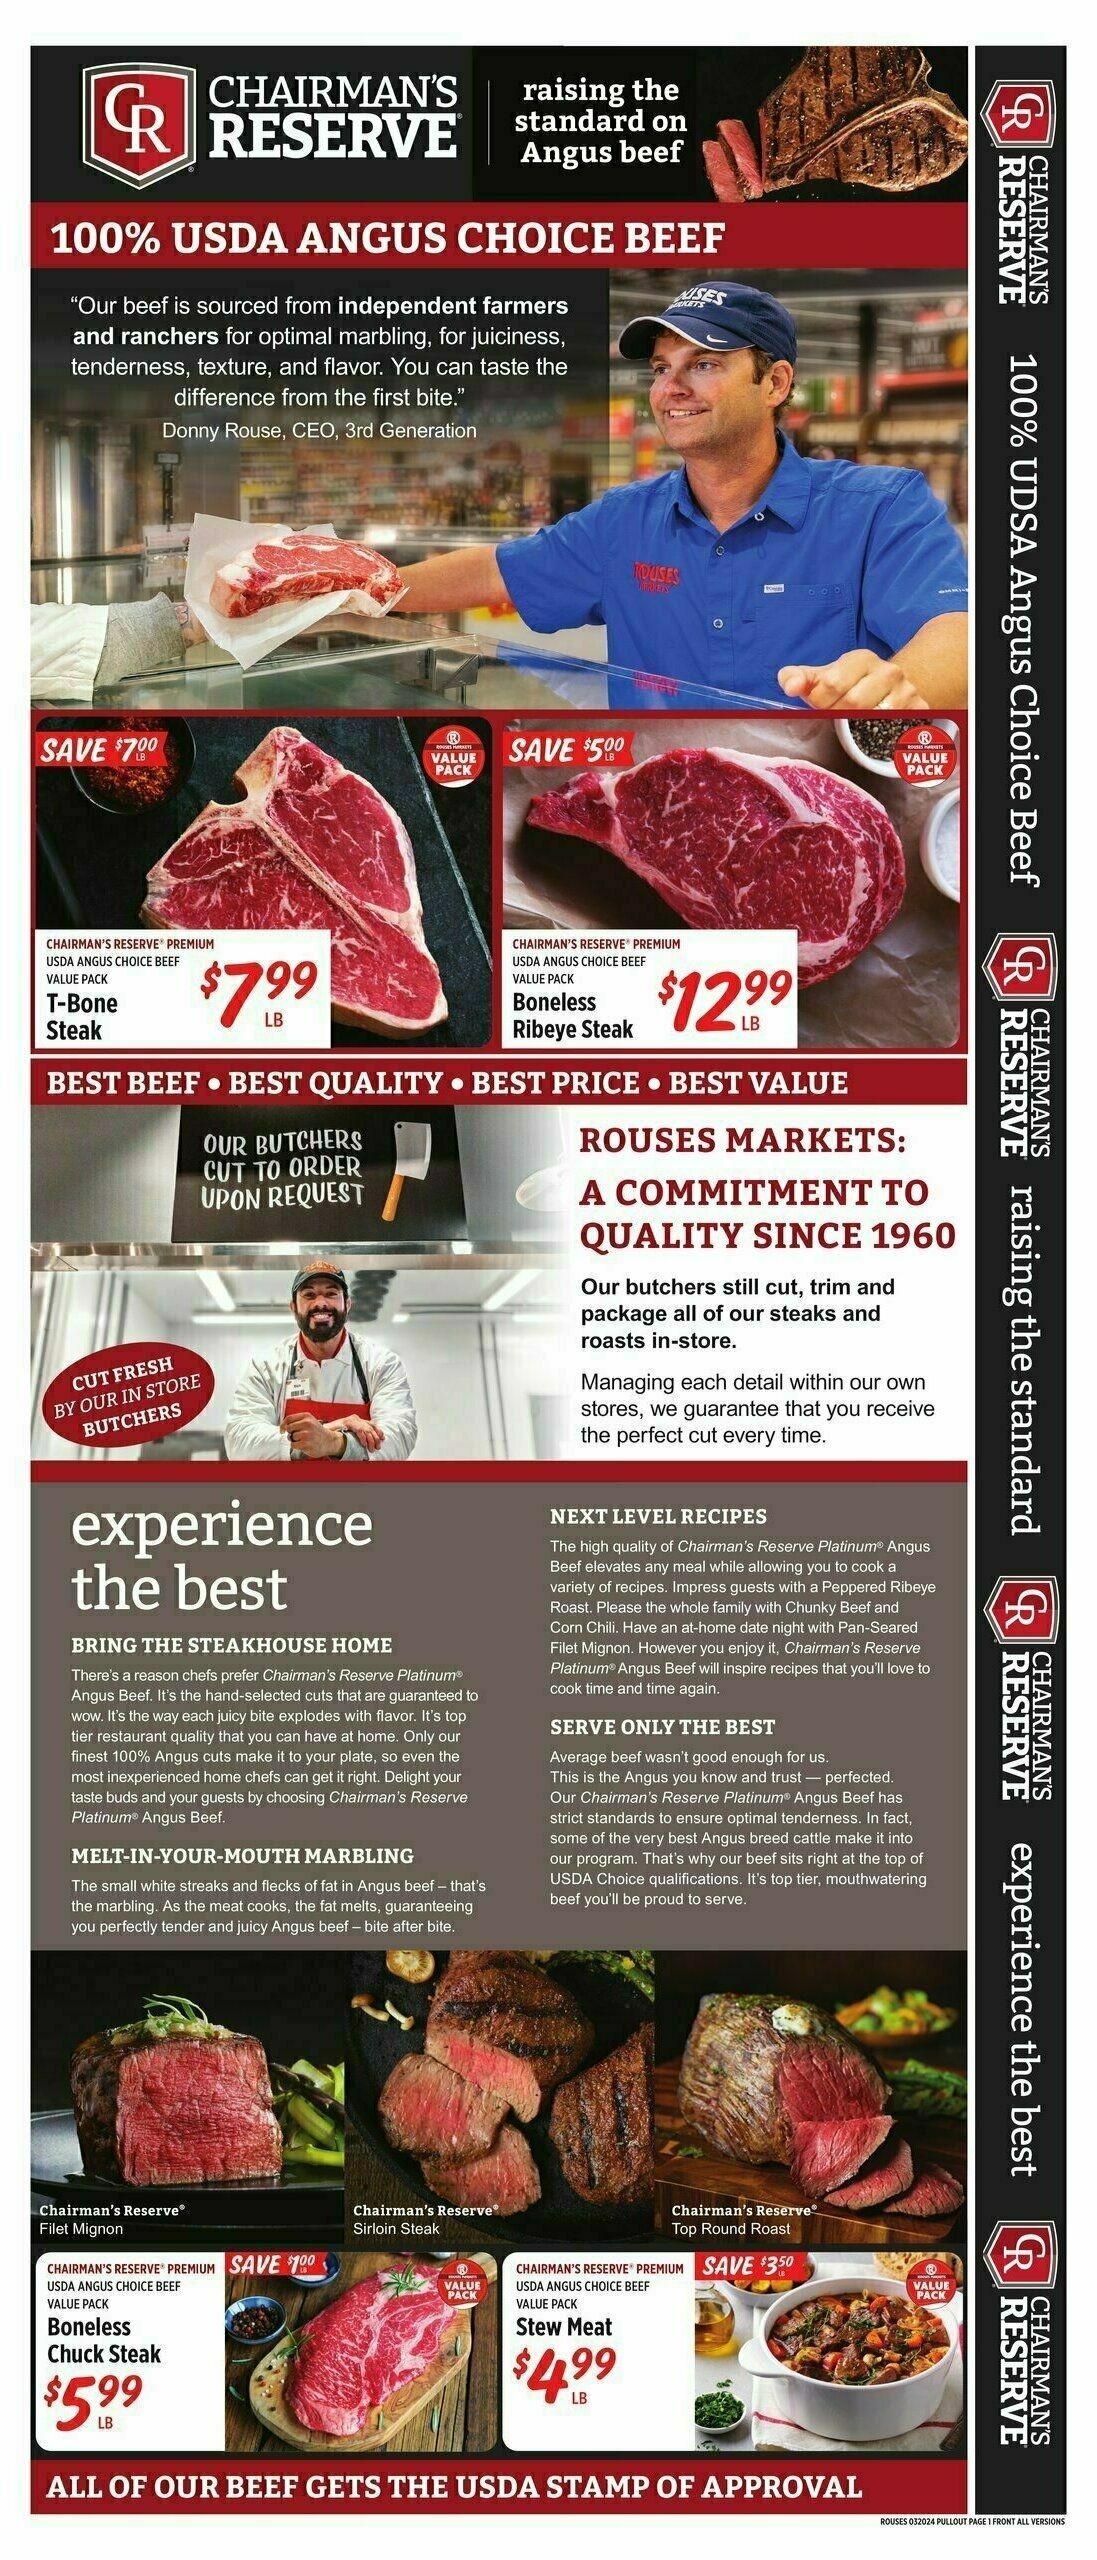 Rouses Markets Weekly Ad from March 20